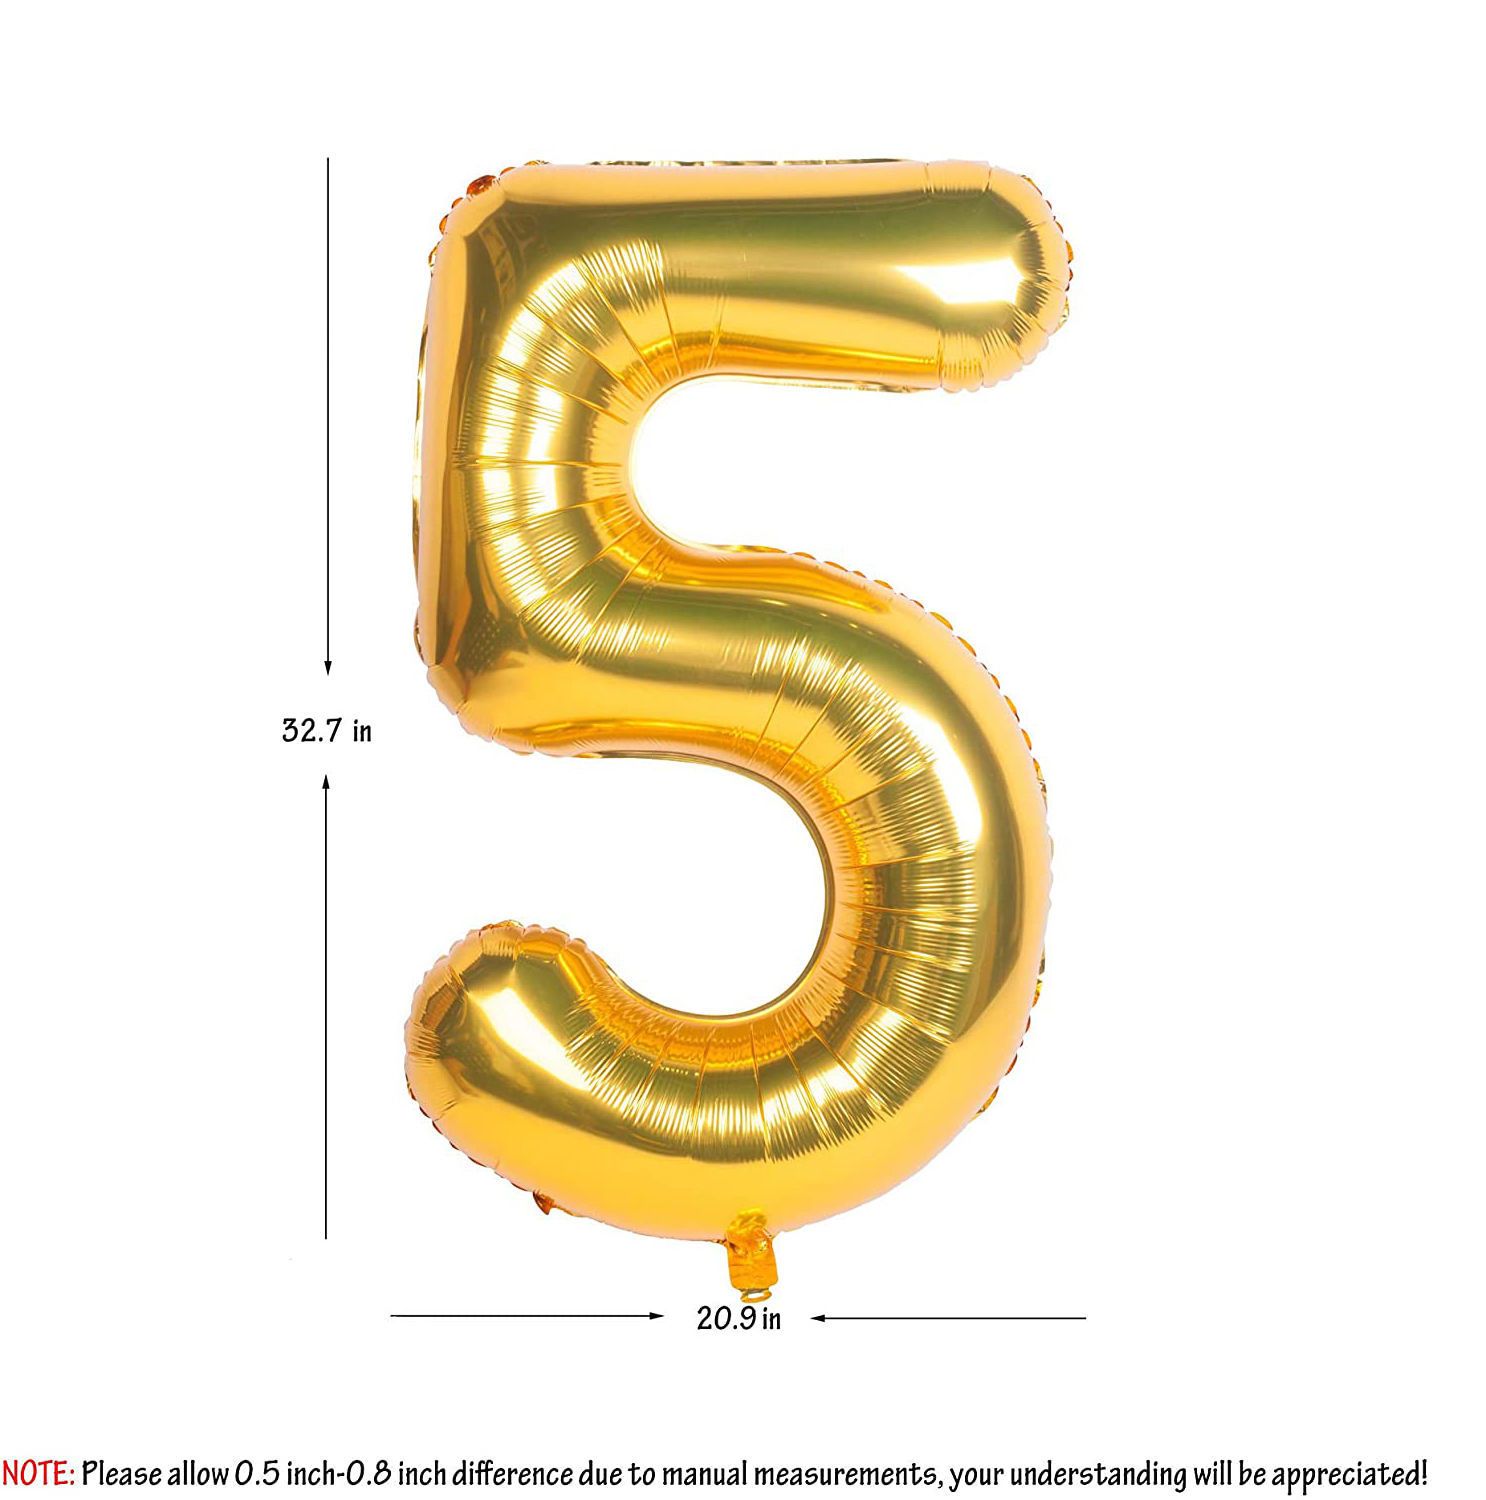 Picture of 34'' Foil Balloon Number 5 - Gold (helium-filled)